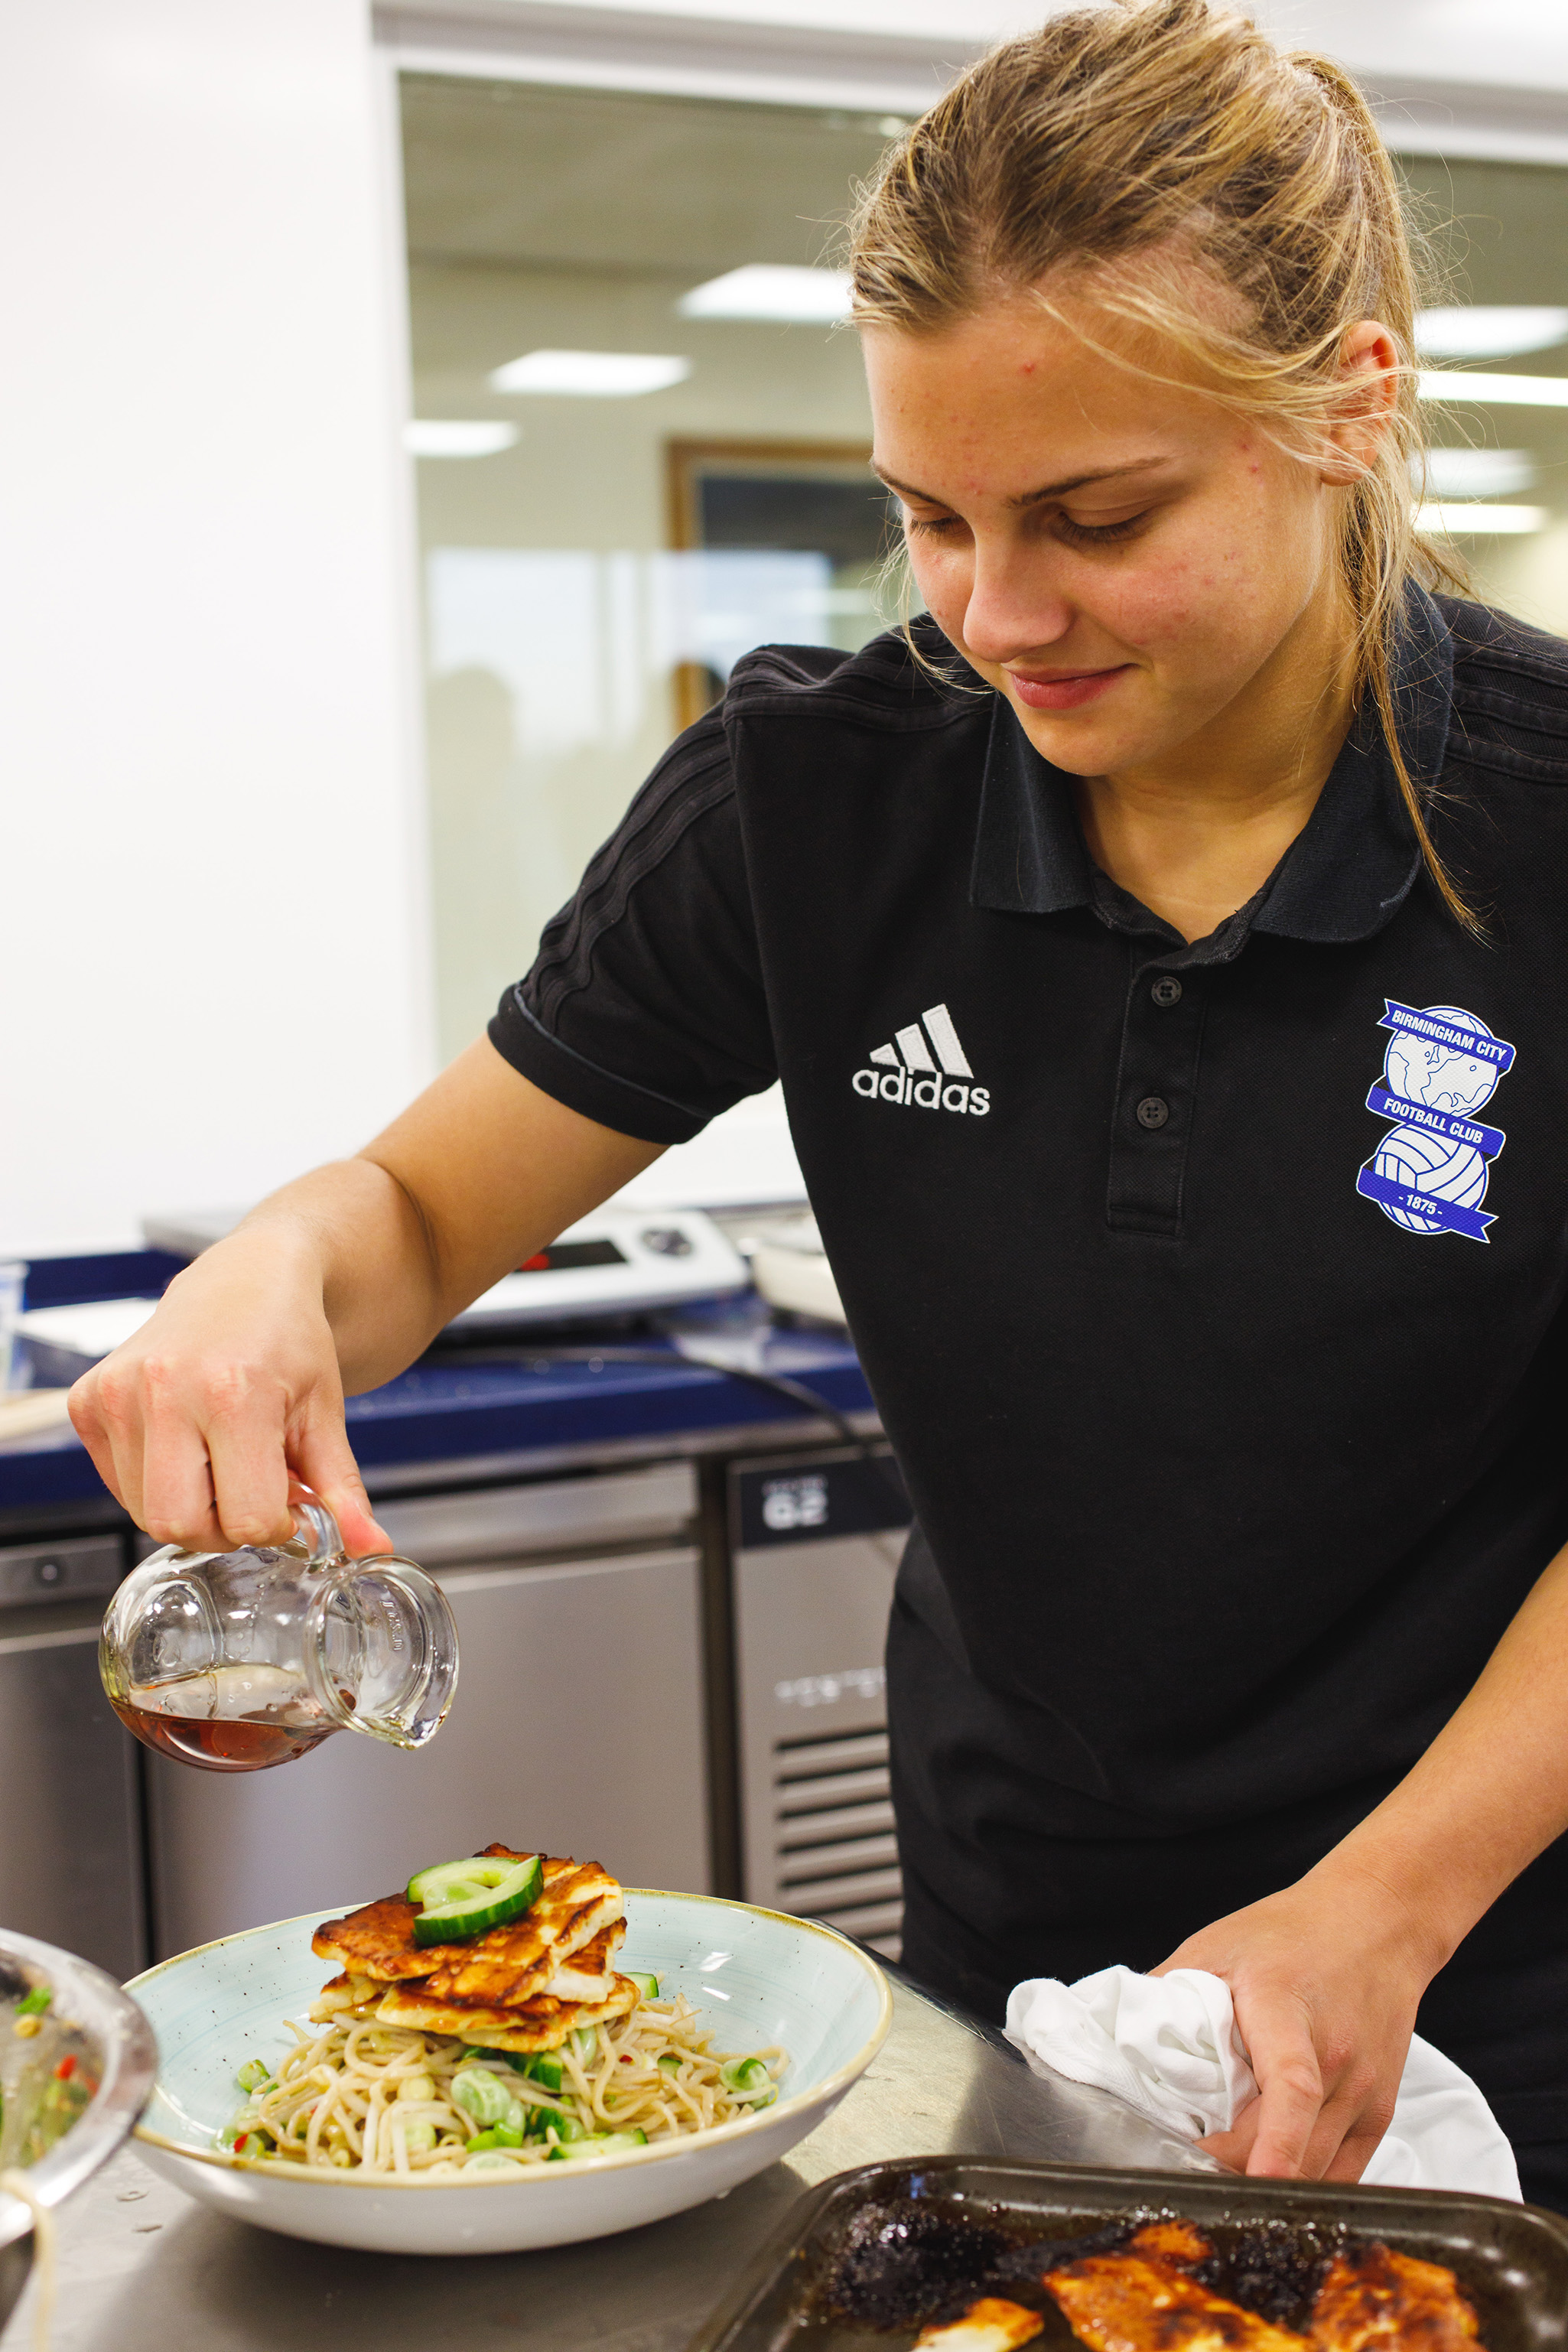 Birmingham city Ladies FC player making a maple infused lunch